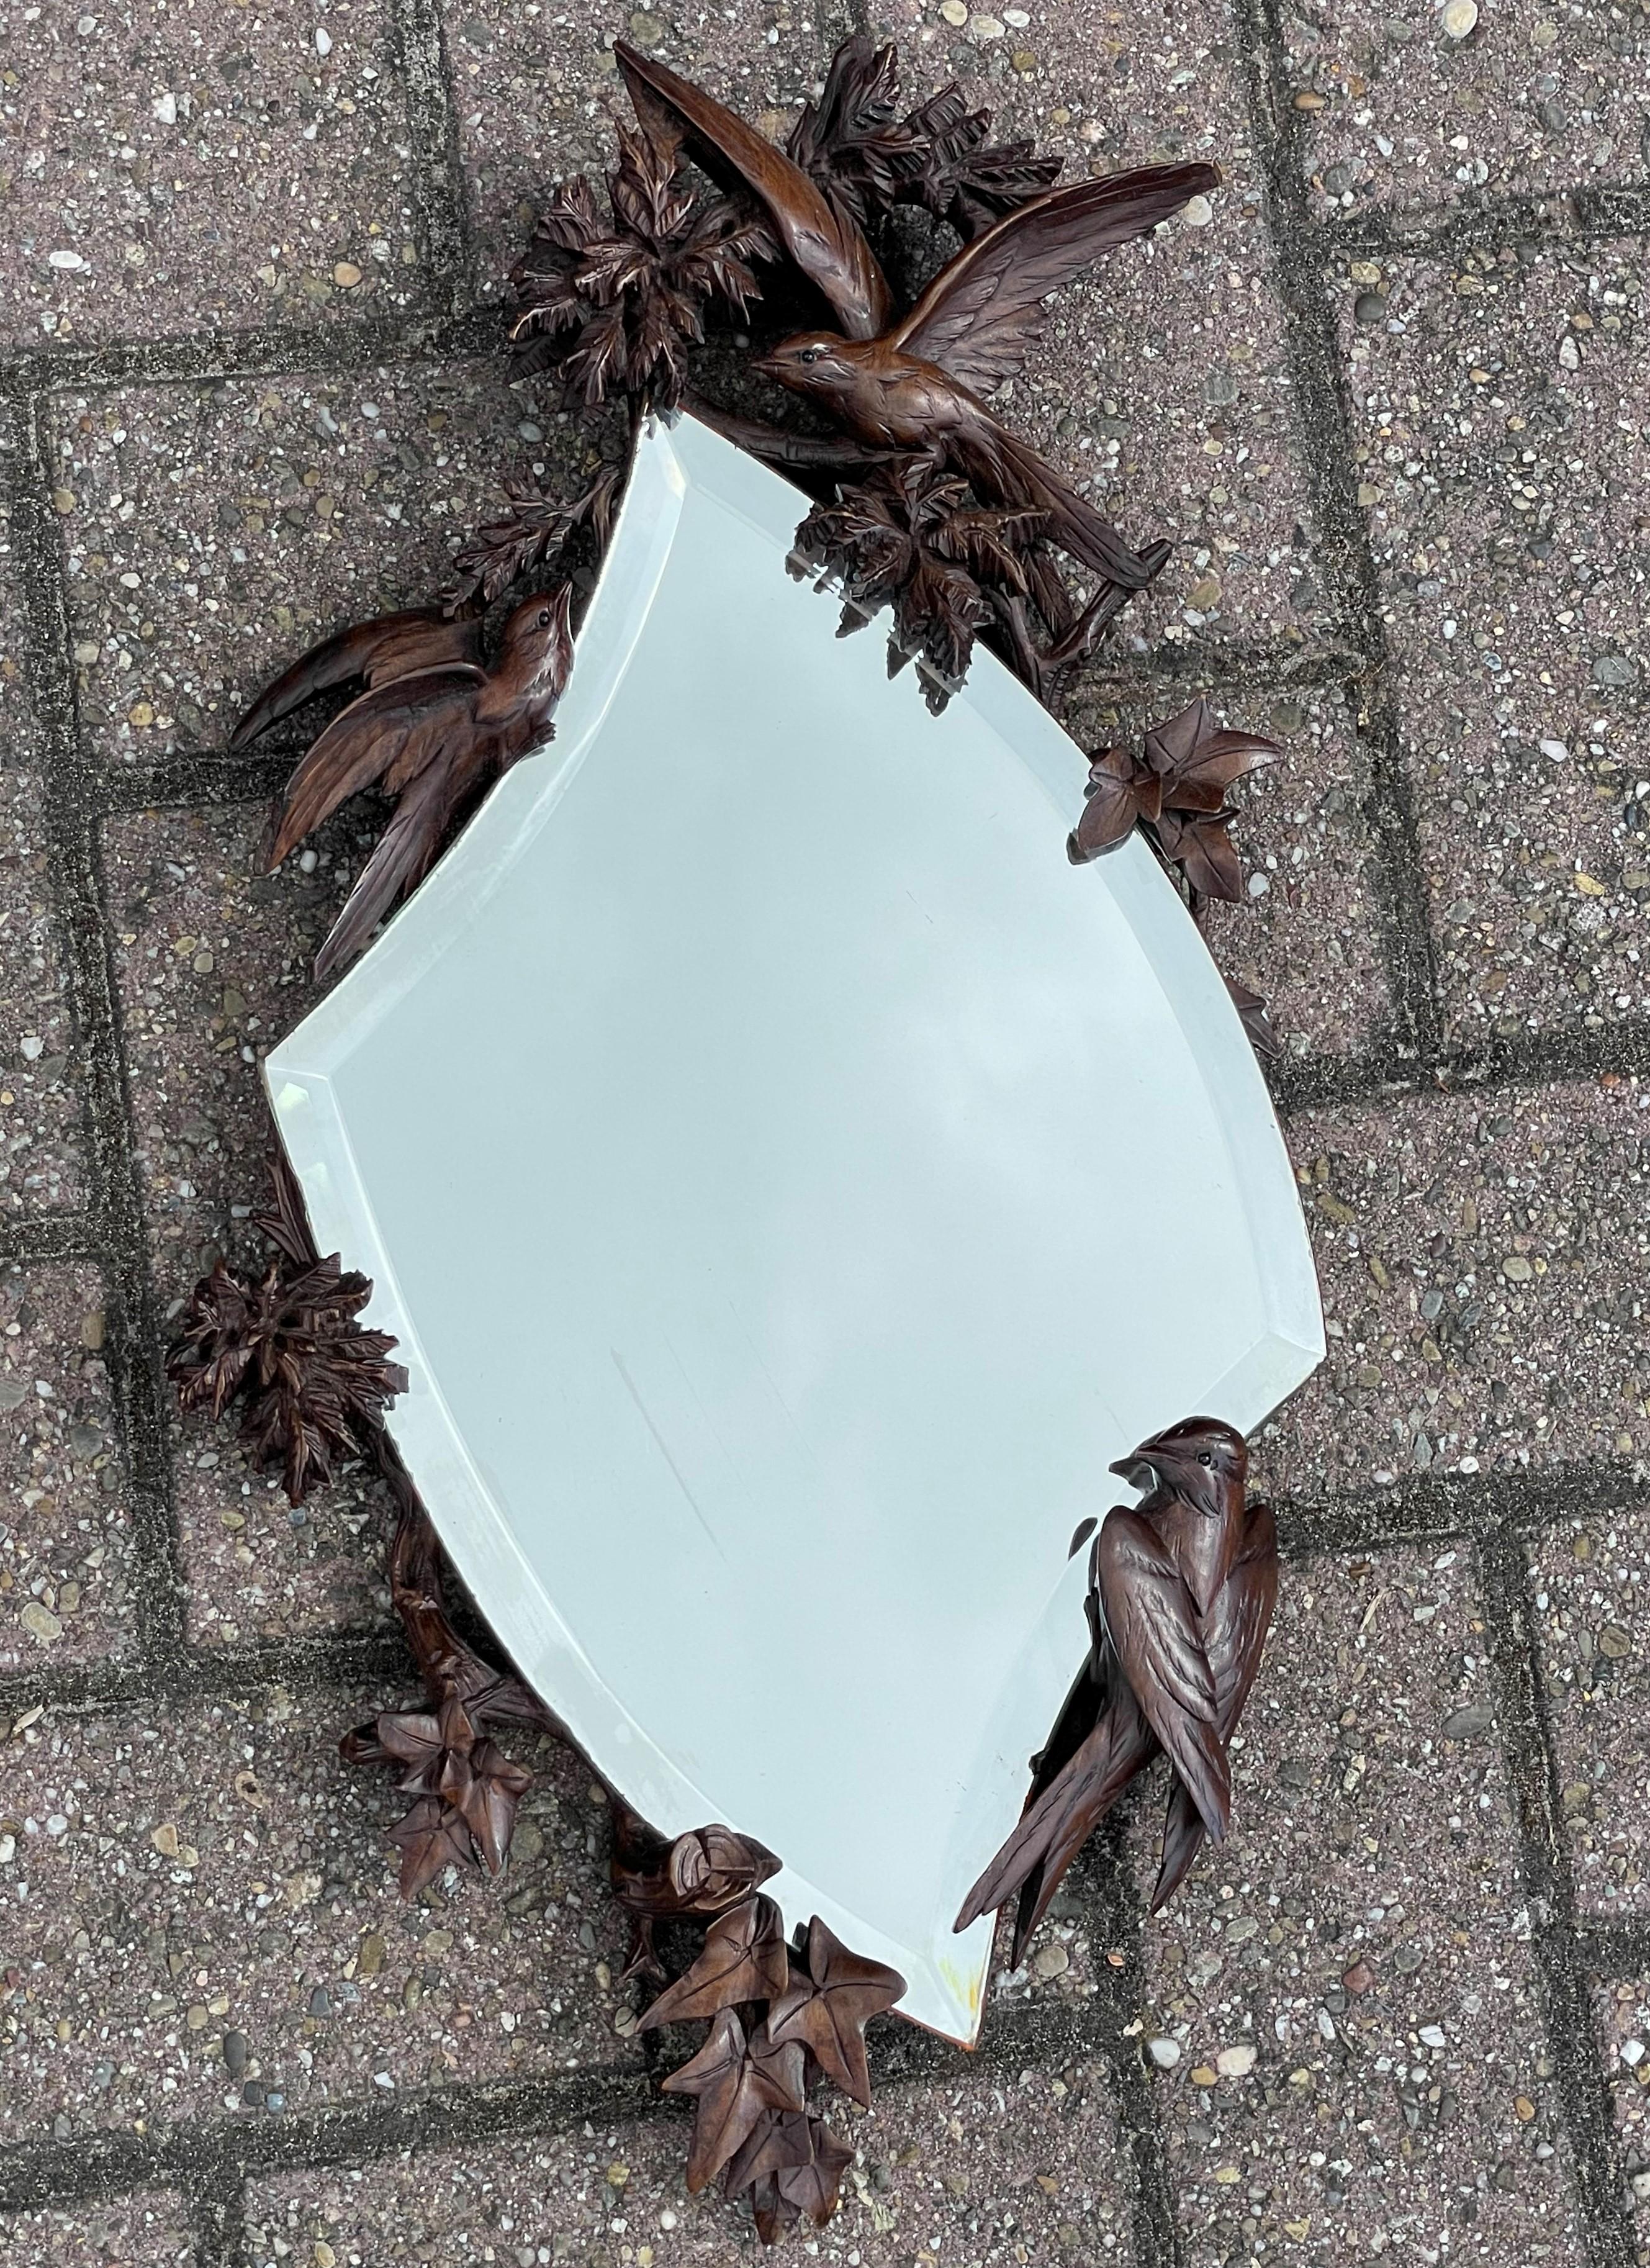 Rare, beautifully carved and highly decorative wall mirror.

If you are appreciative of rare and sculptural antiques then this Swiss BF mirror could be exactly what you are looking for. The quality and the patina of this swallow sculptures mirror